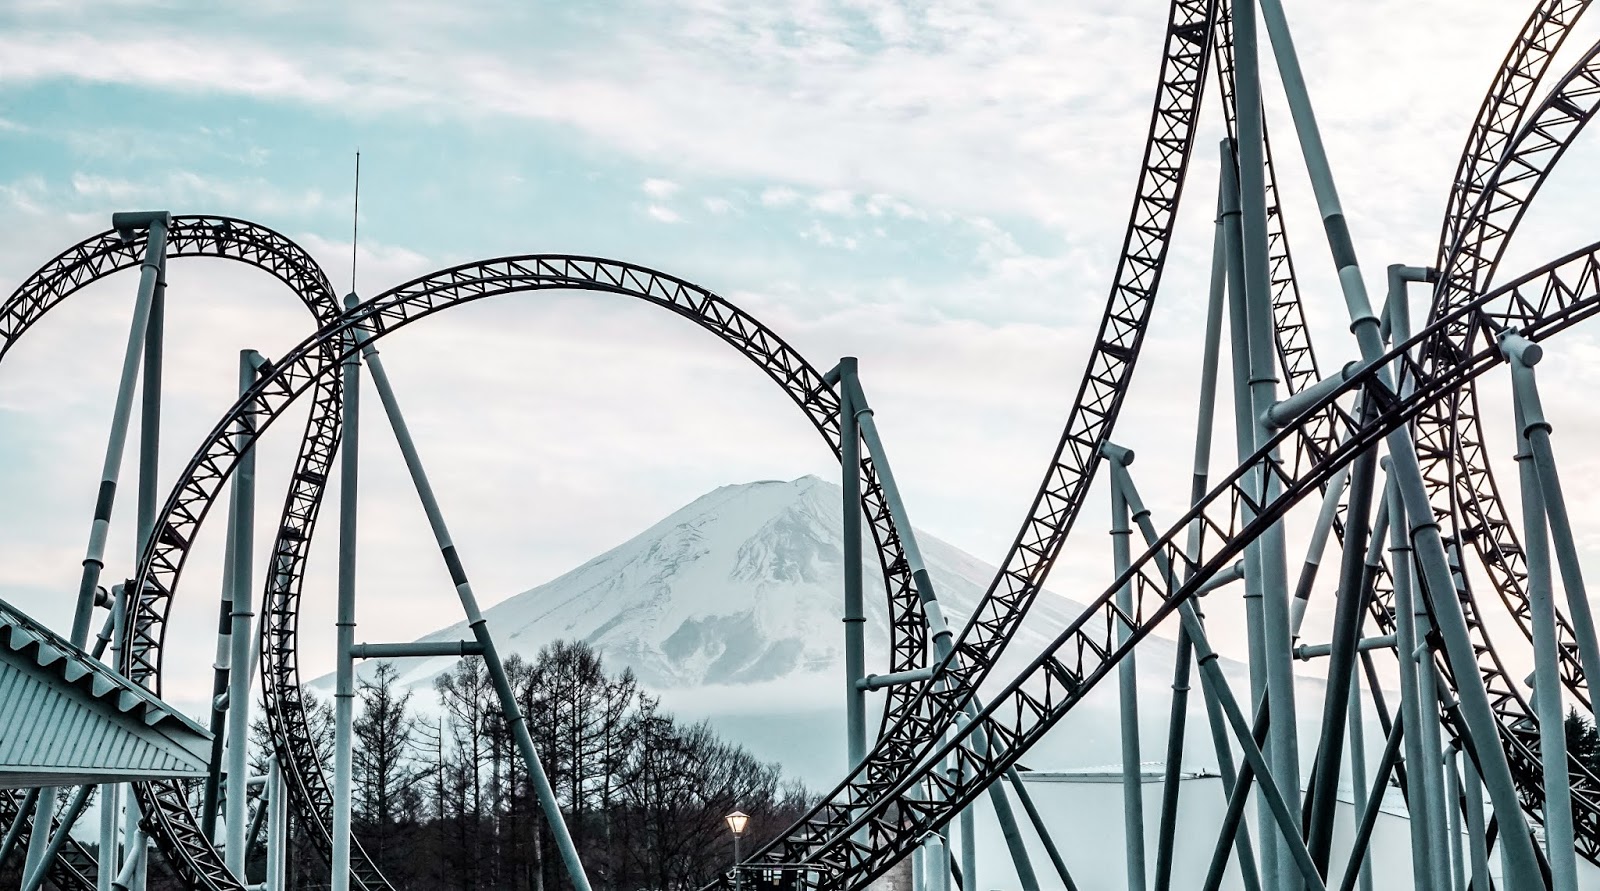 FUJI-Q Highland: Conquered the tallest and fastest roller coaster in the world.